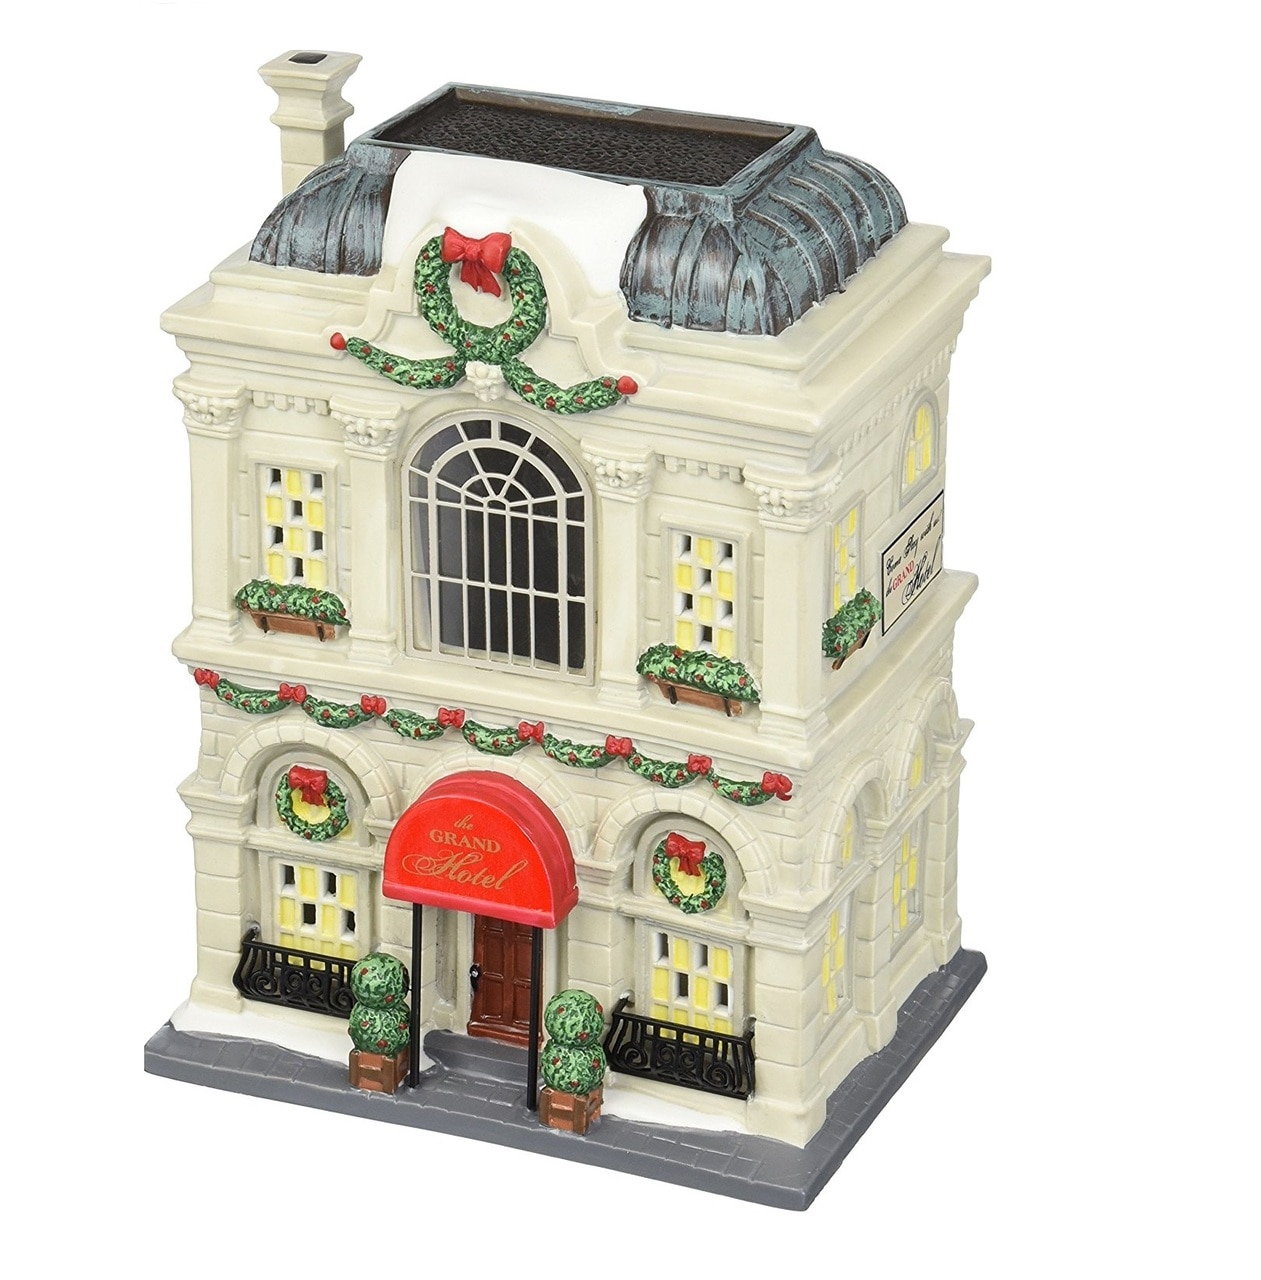 Department 56 Christmas In The City The Grand Hotel The Partridge Tree Gift Shop